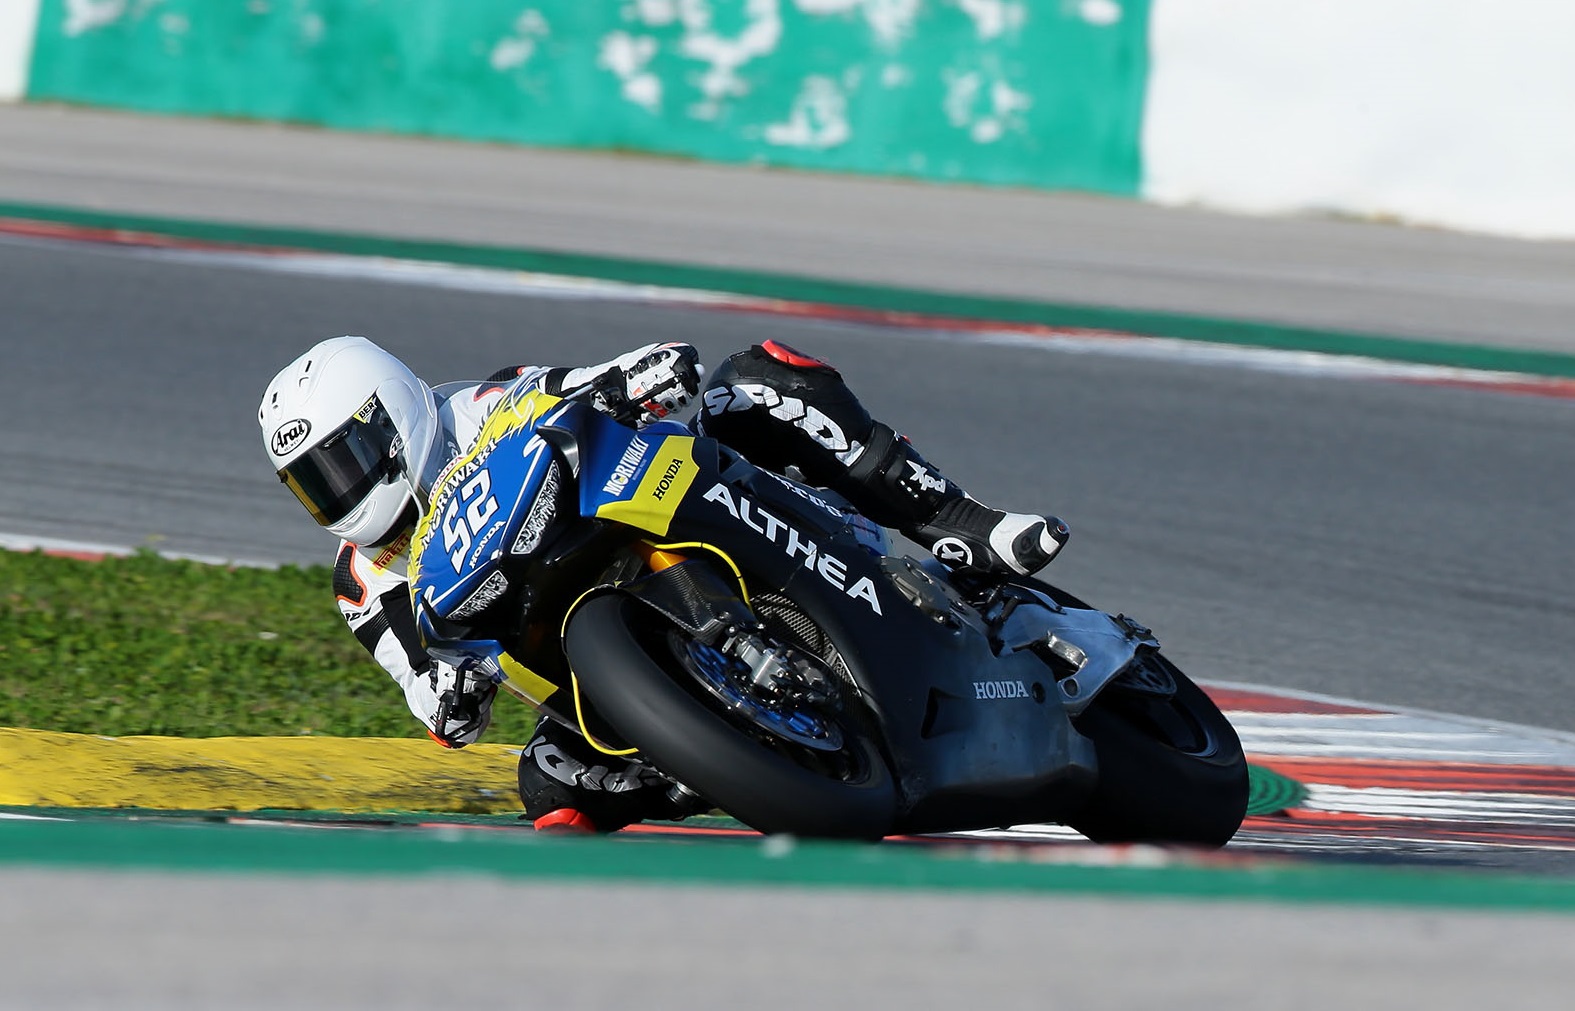 Il team Althea MIE Racing conclude i test invernali europei